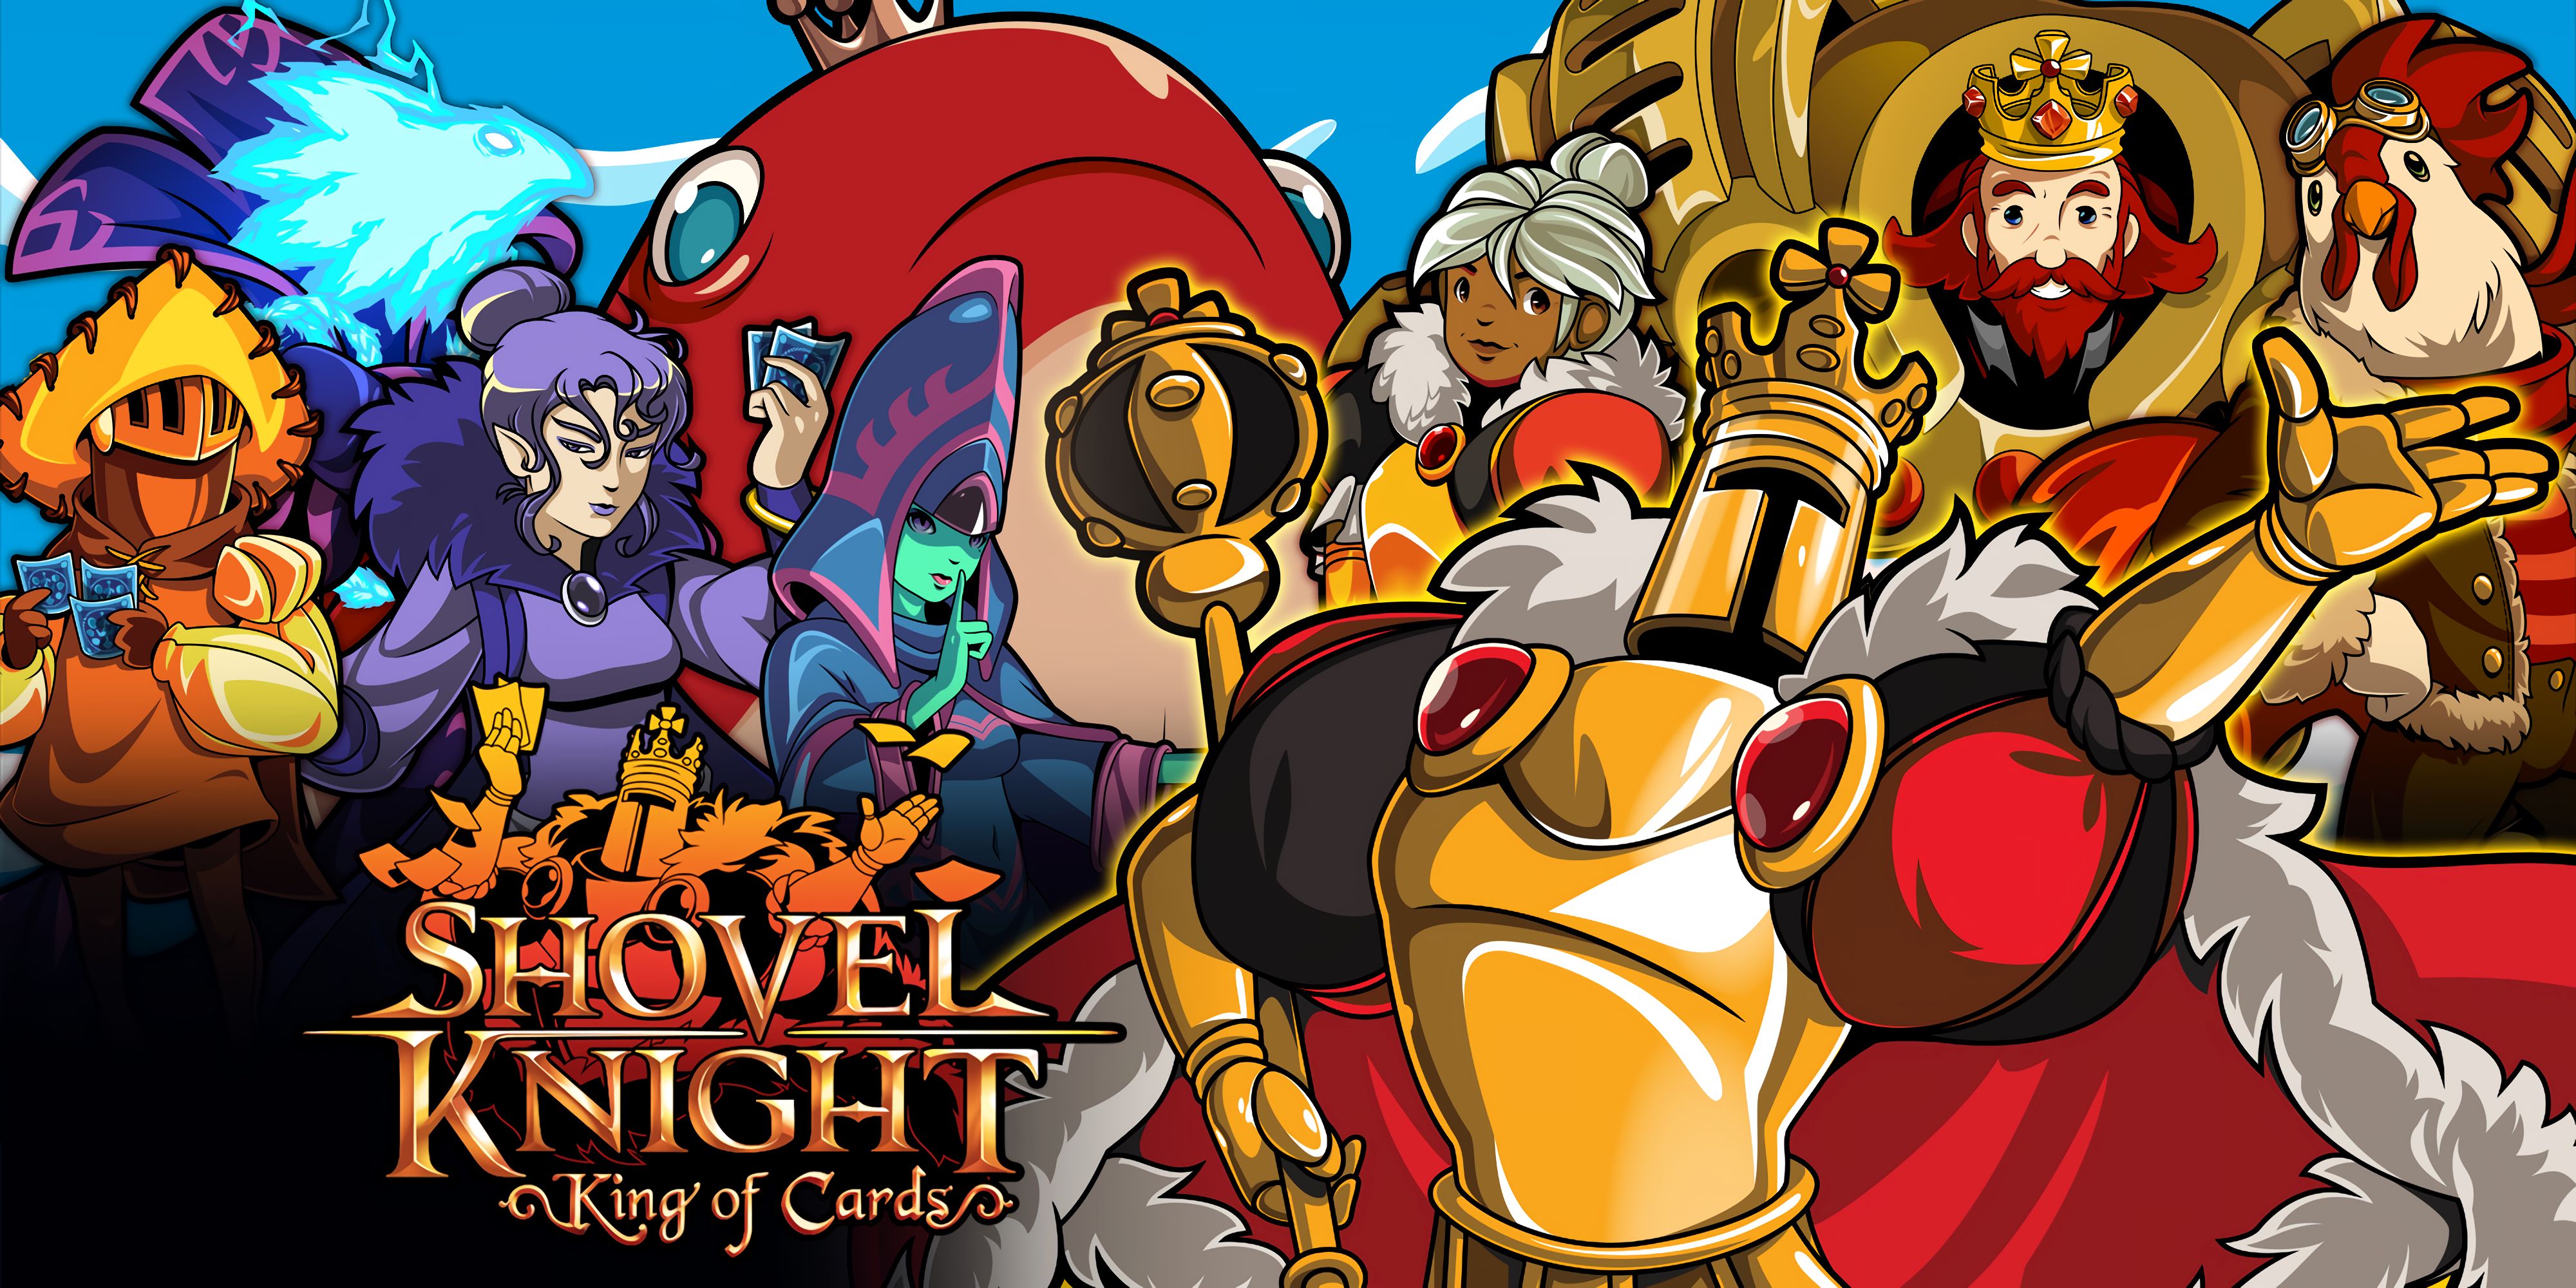 I collected some Shovel Knight wallpapers and edited them for mobile  r ShovelKnight